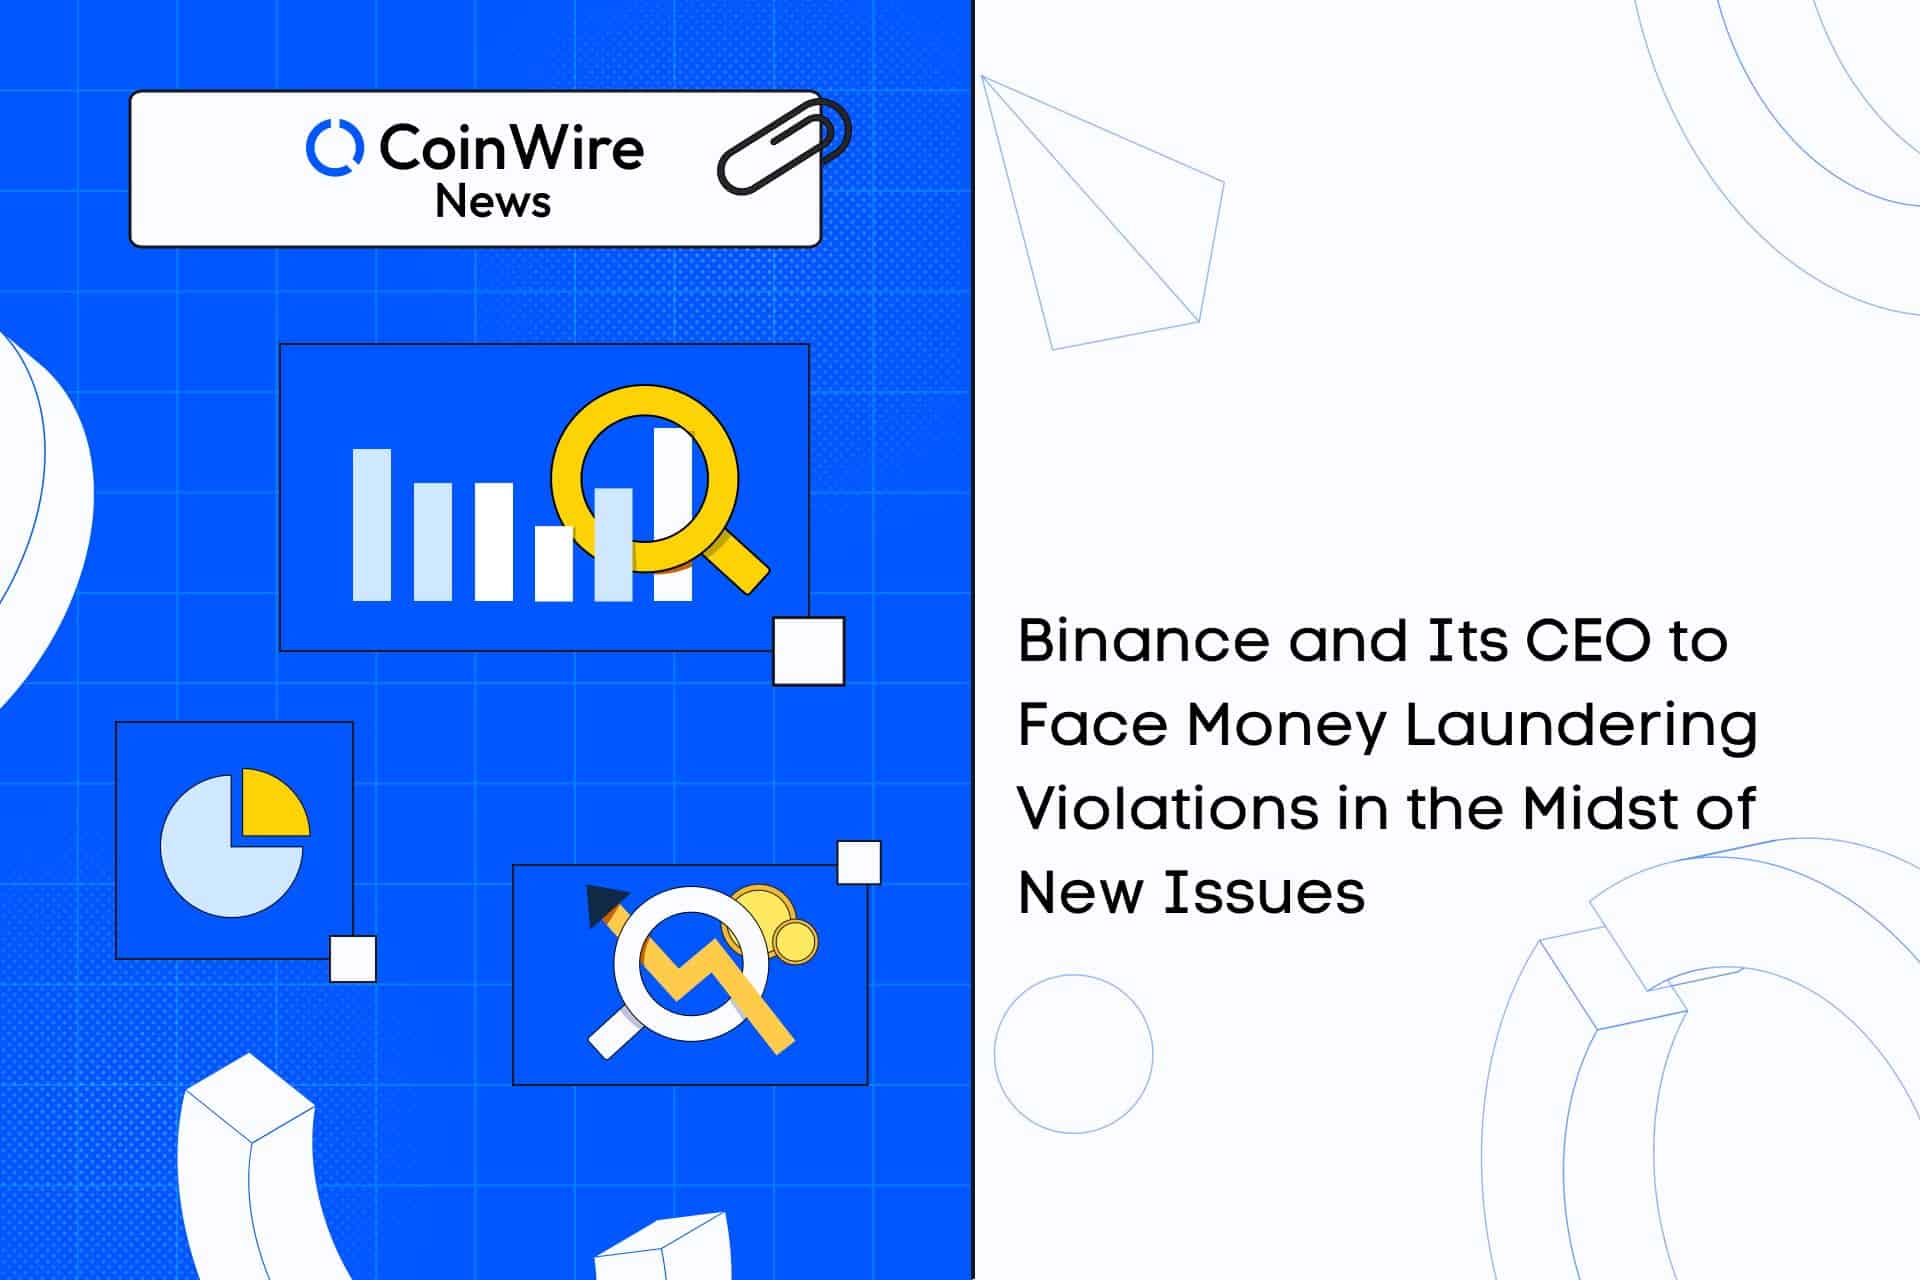 Binance And Its Ceo To Face Money Laundering Violations In The Midst Of 'Abnormal' Altcoin Trading On The Platform